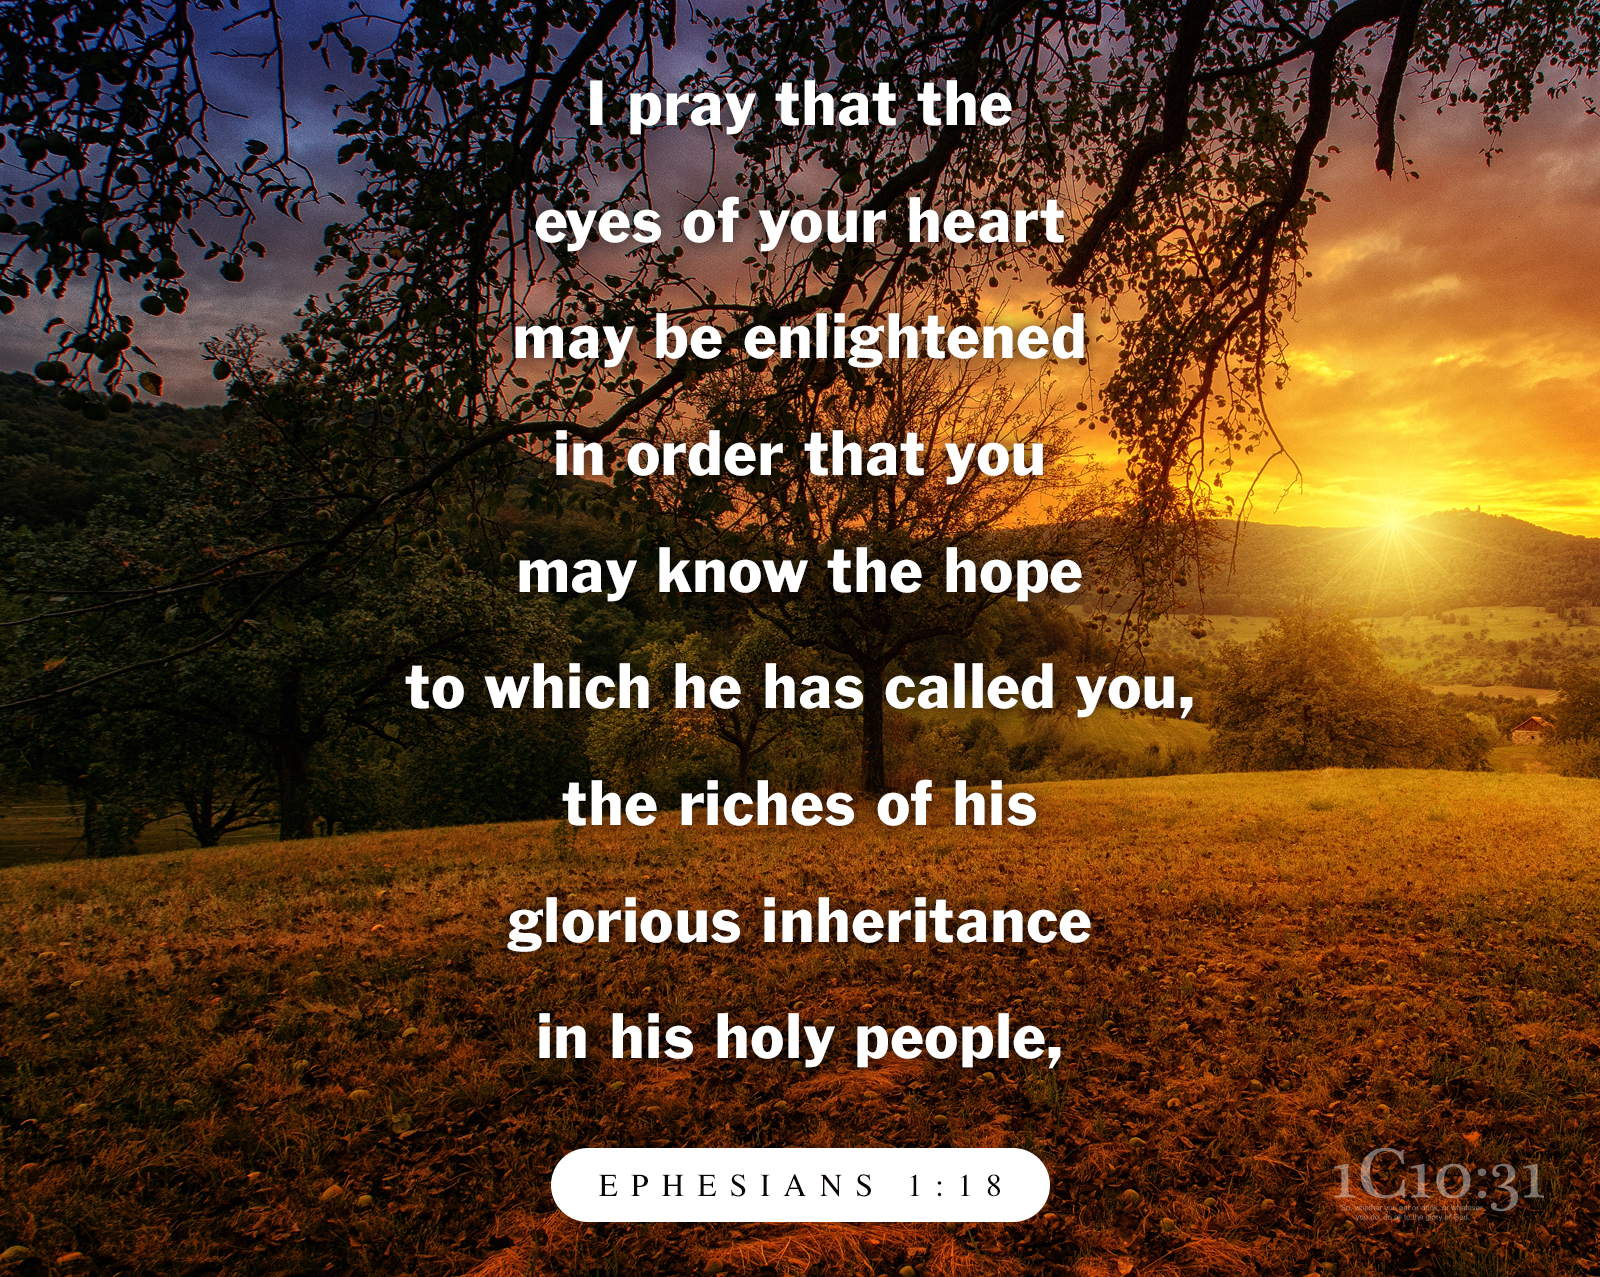 Ephesians 1:18 I pray that the eyes of your heart may be enlightened in order that you may know the hope to which he has called you, the riches of his glorious inheritance in his holy people,